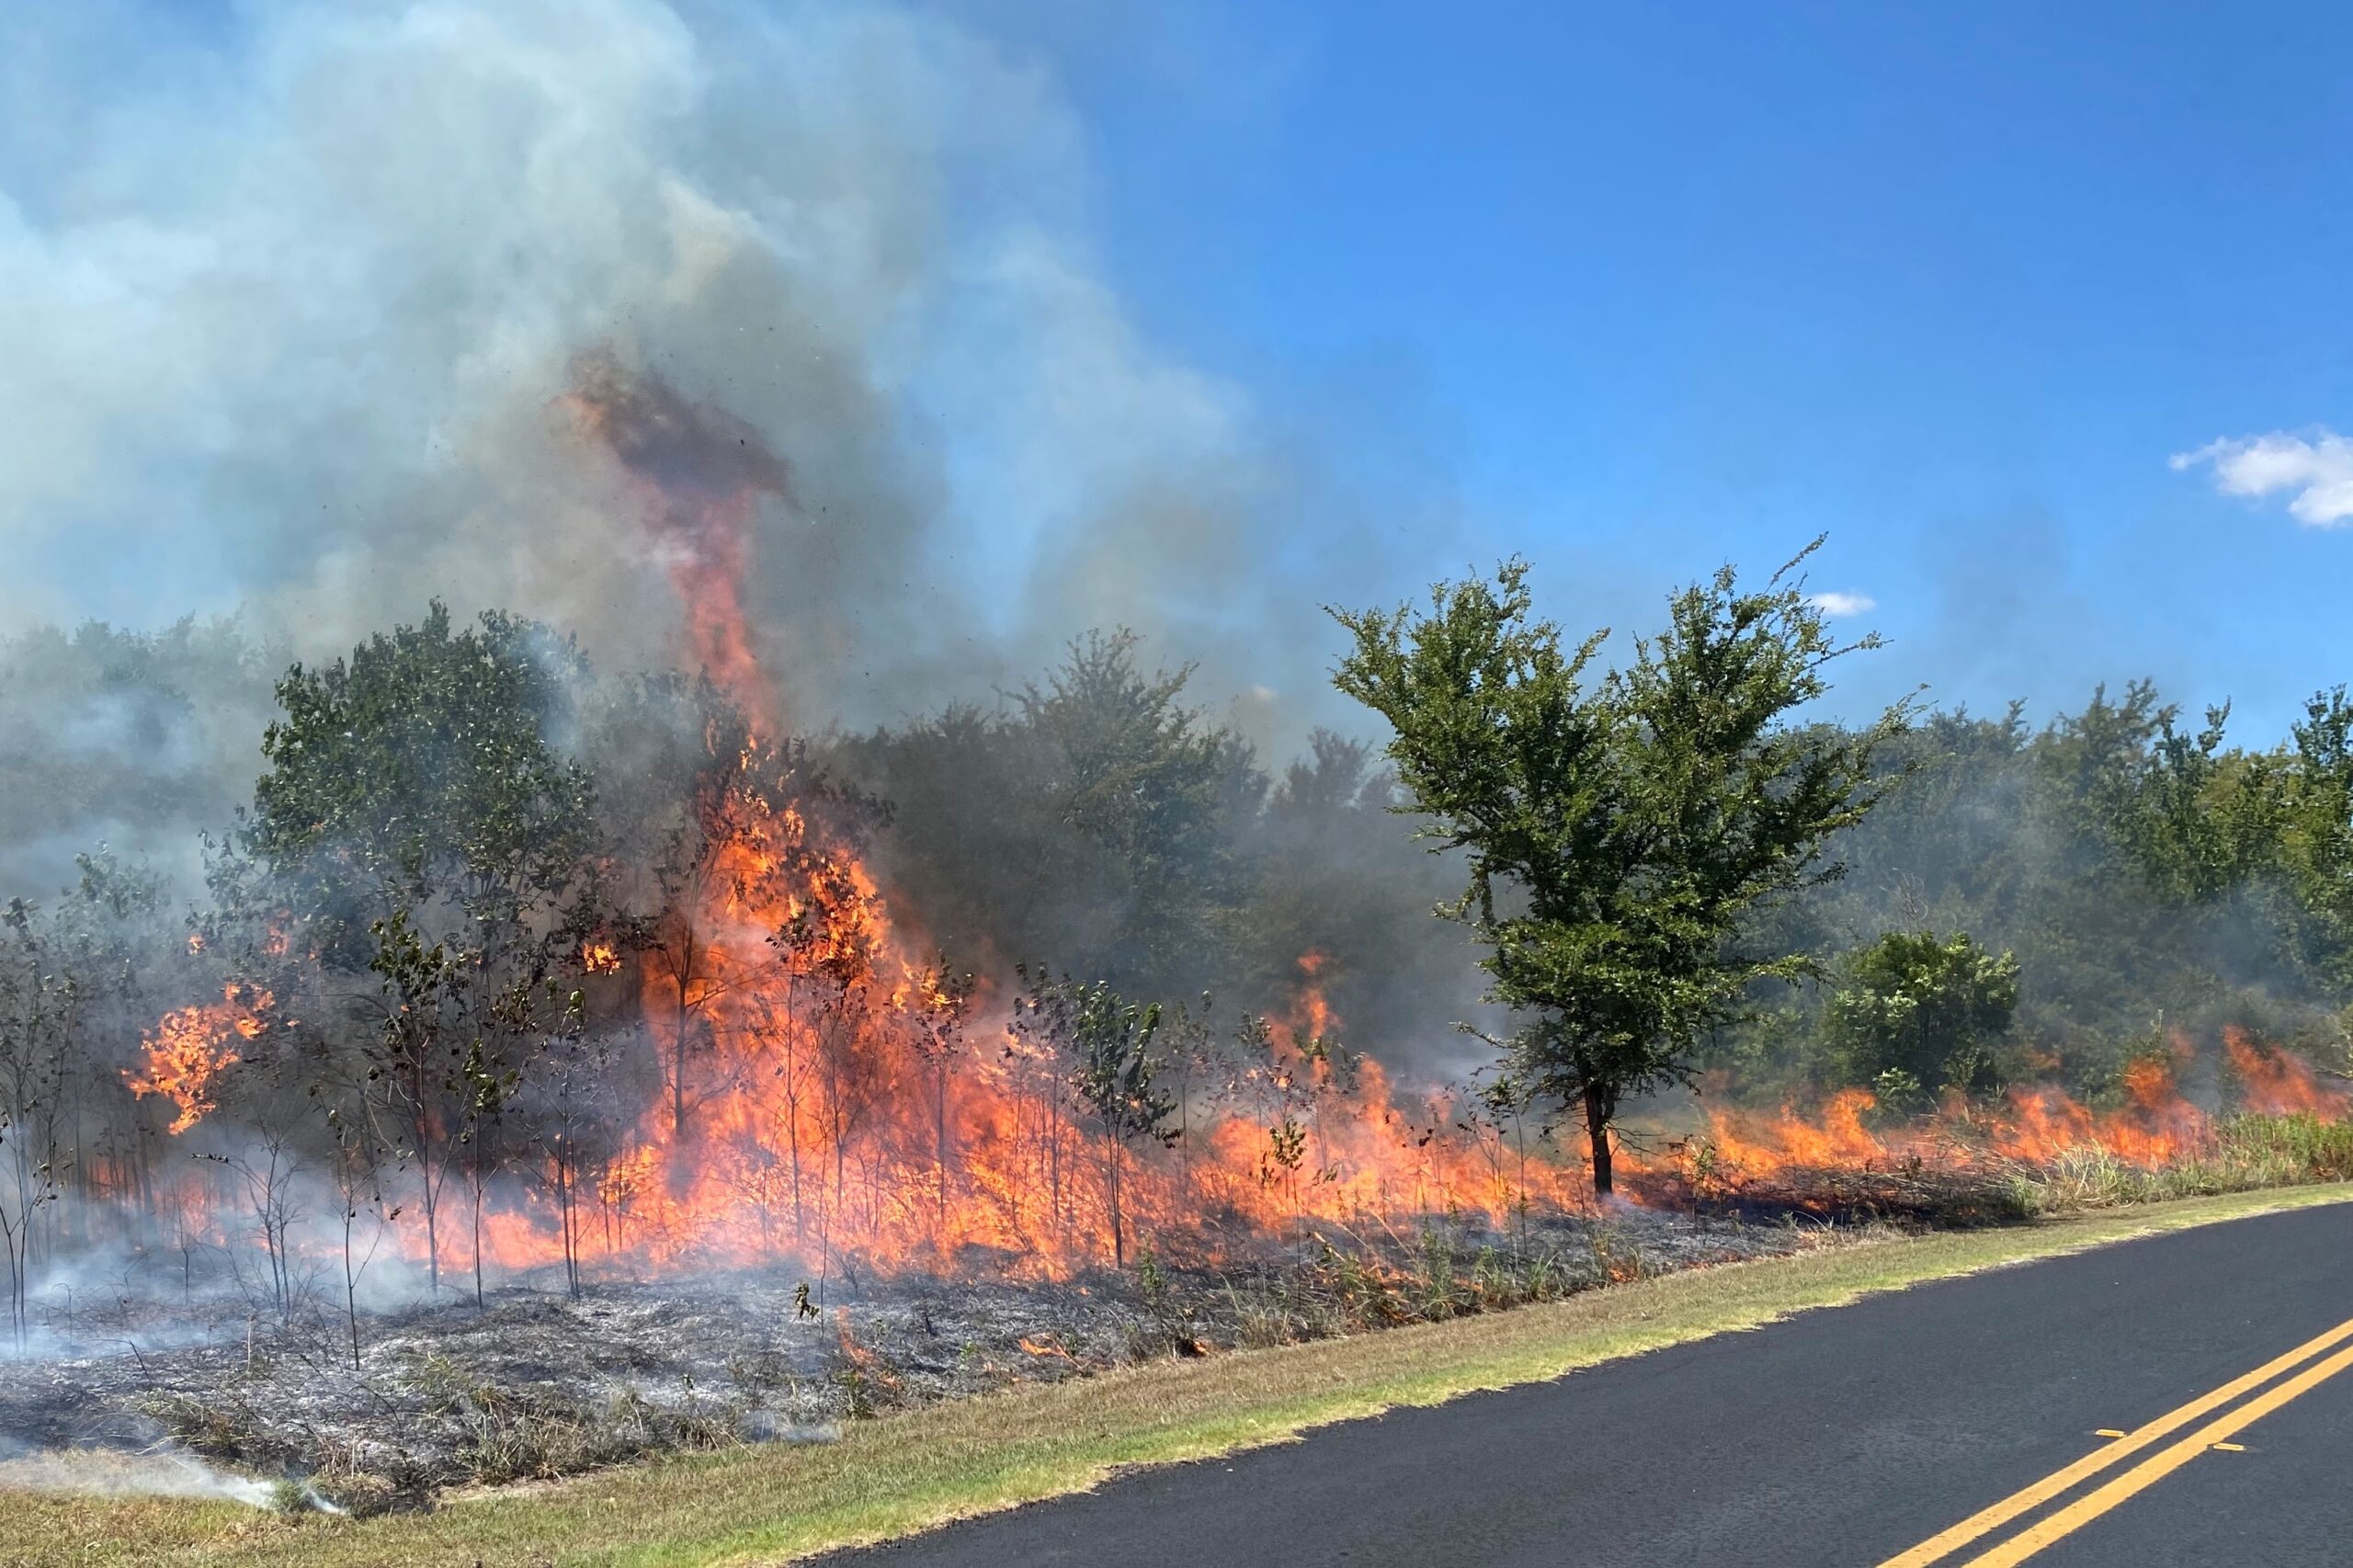 Prescribed Fire Conducted at Cooper Lake State Park during August for Habitat Enhancement